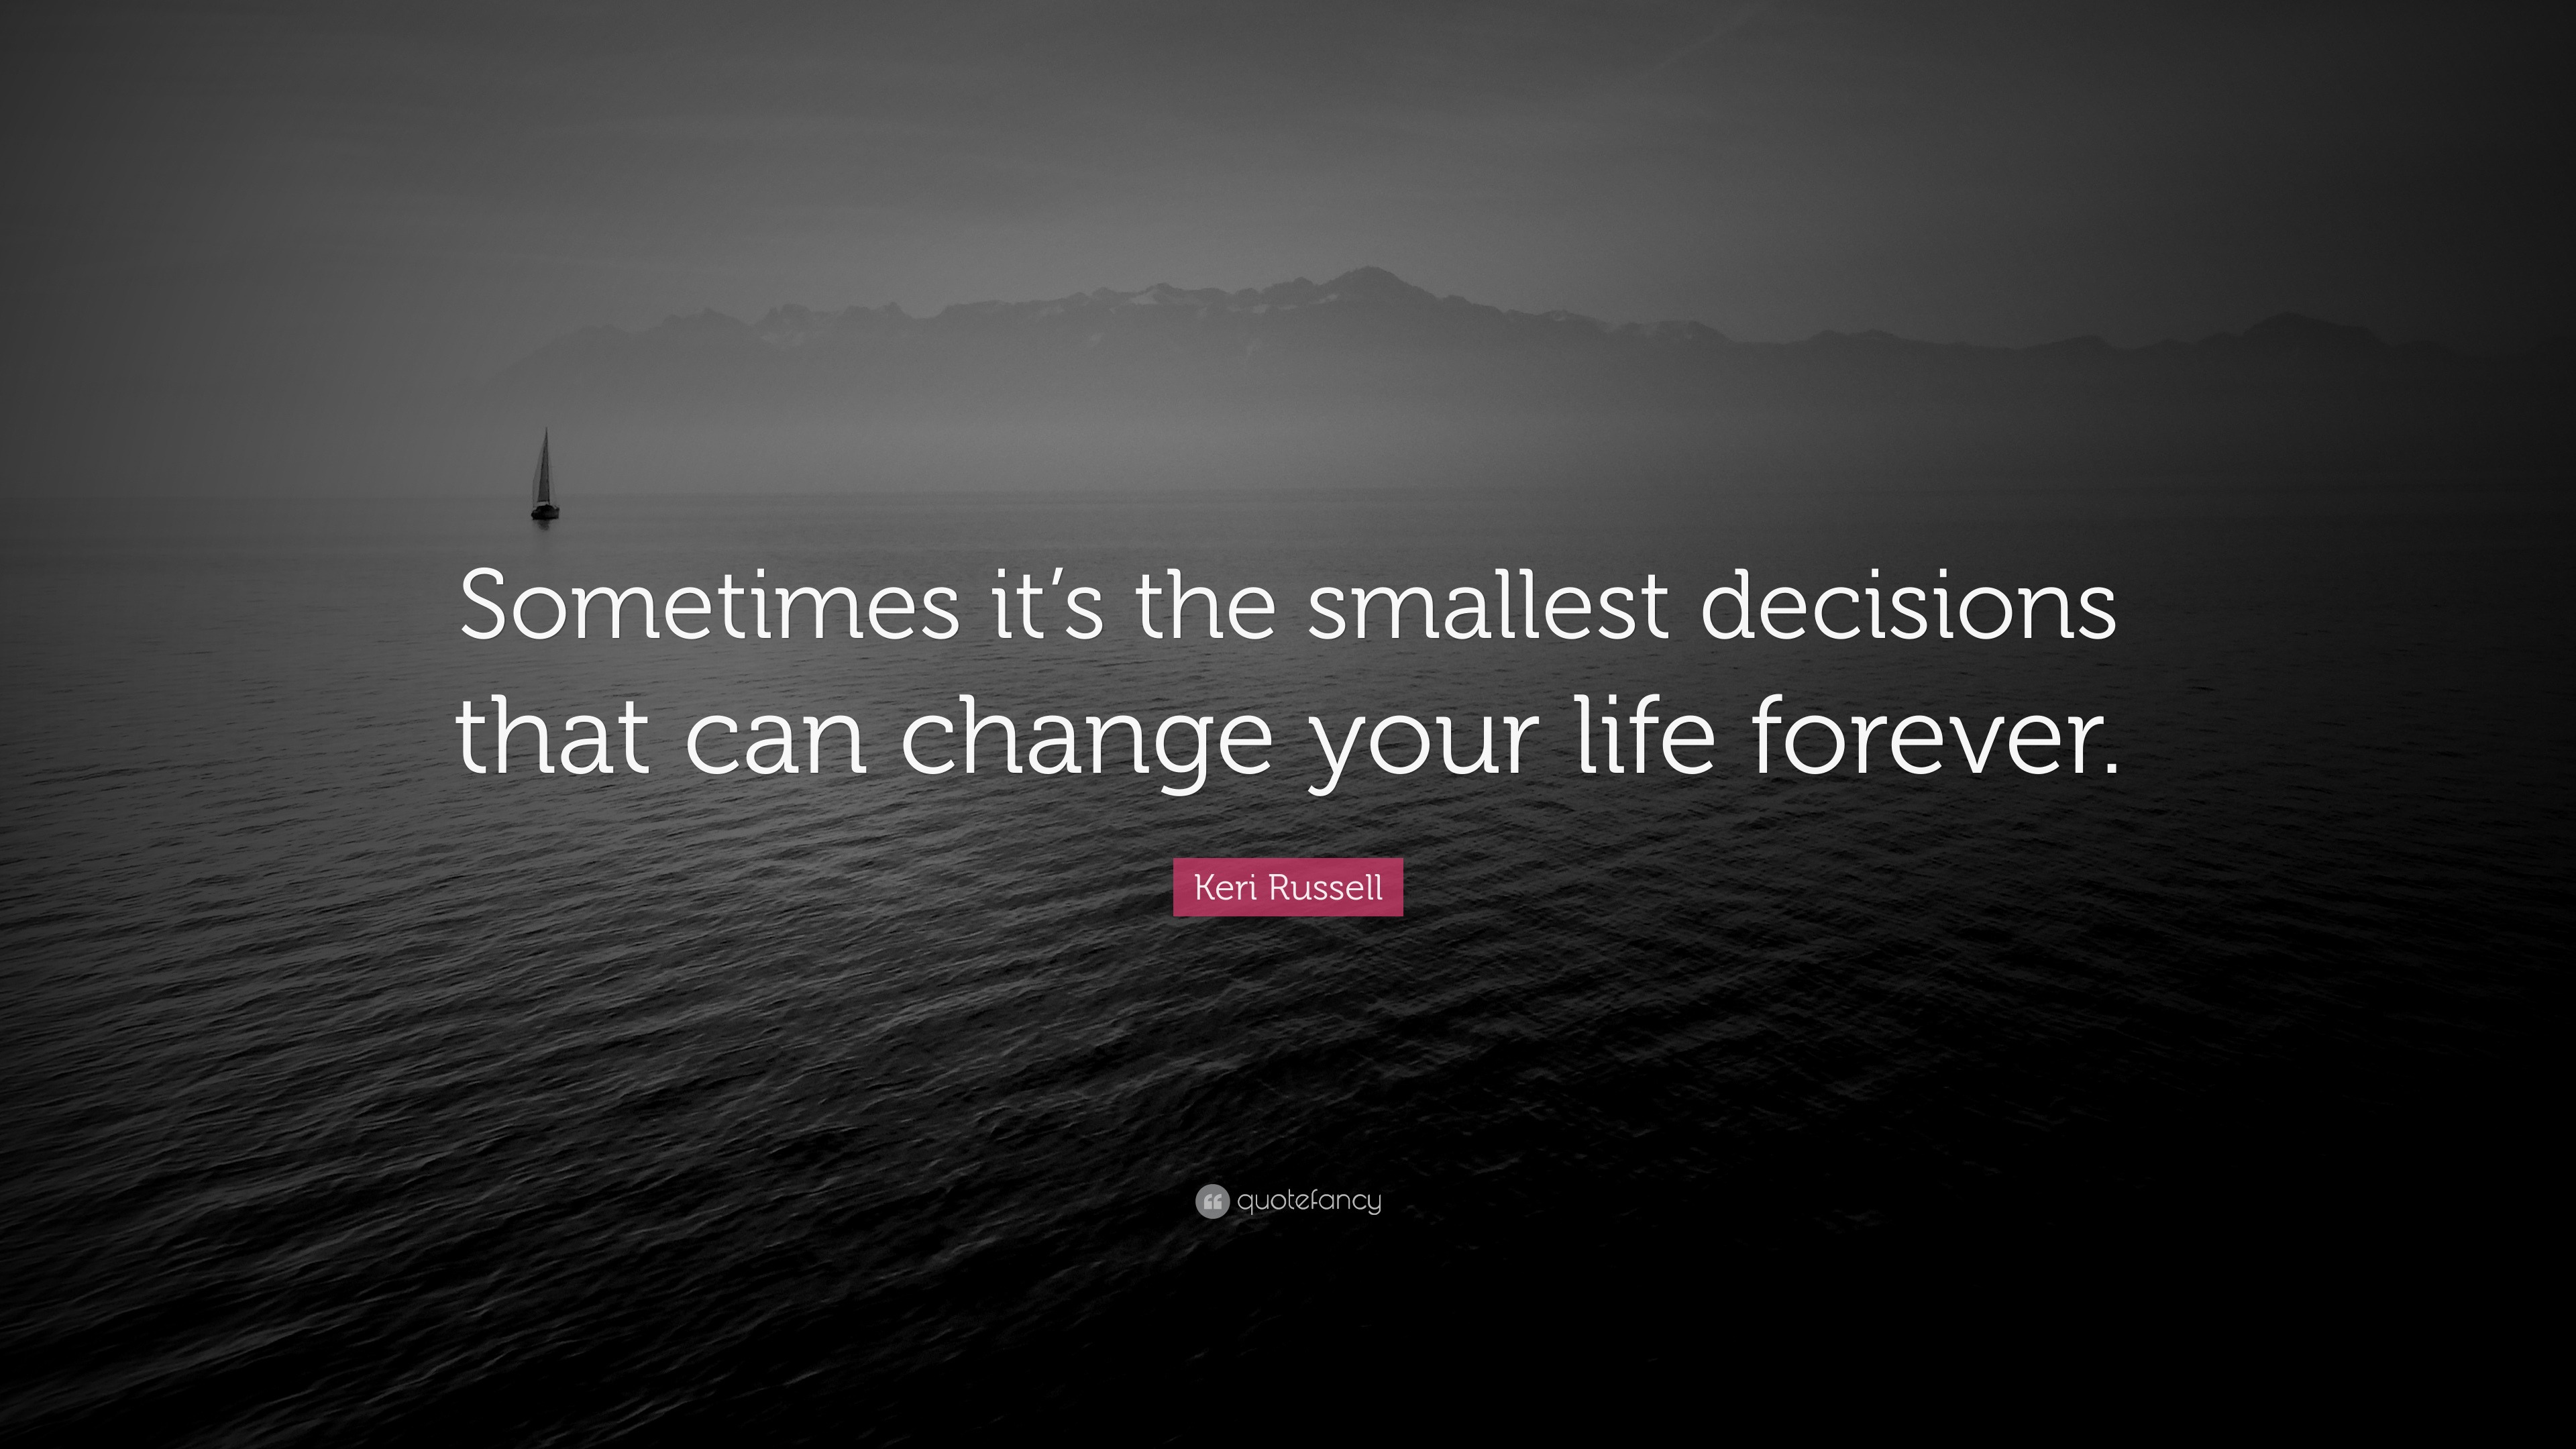 quotes about life changing decisions keri russell quote u201csometimes it u0027s the smallest decisions that